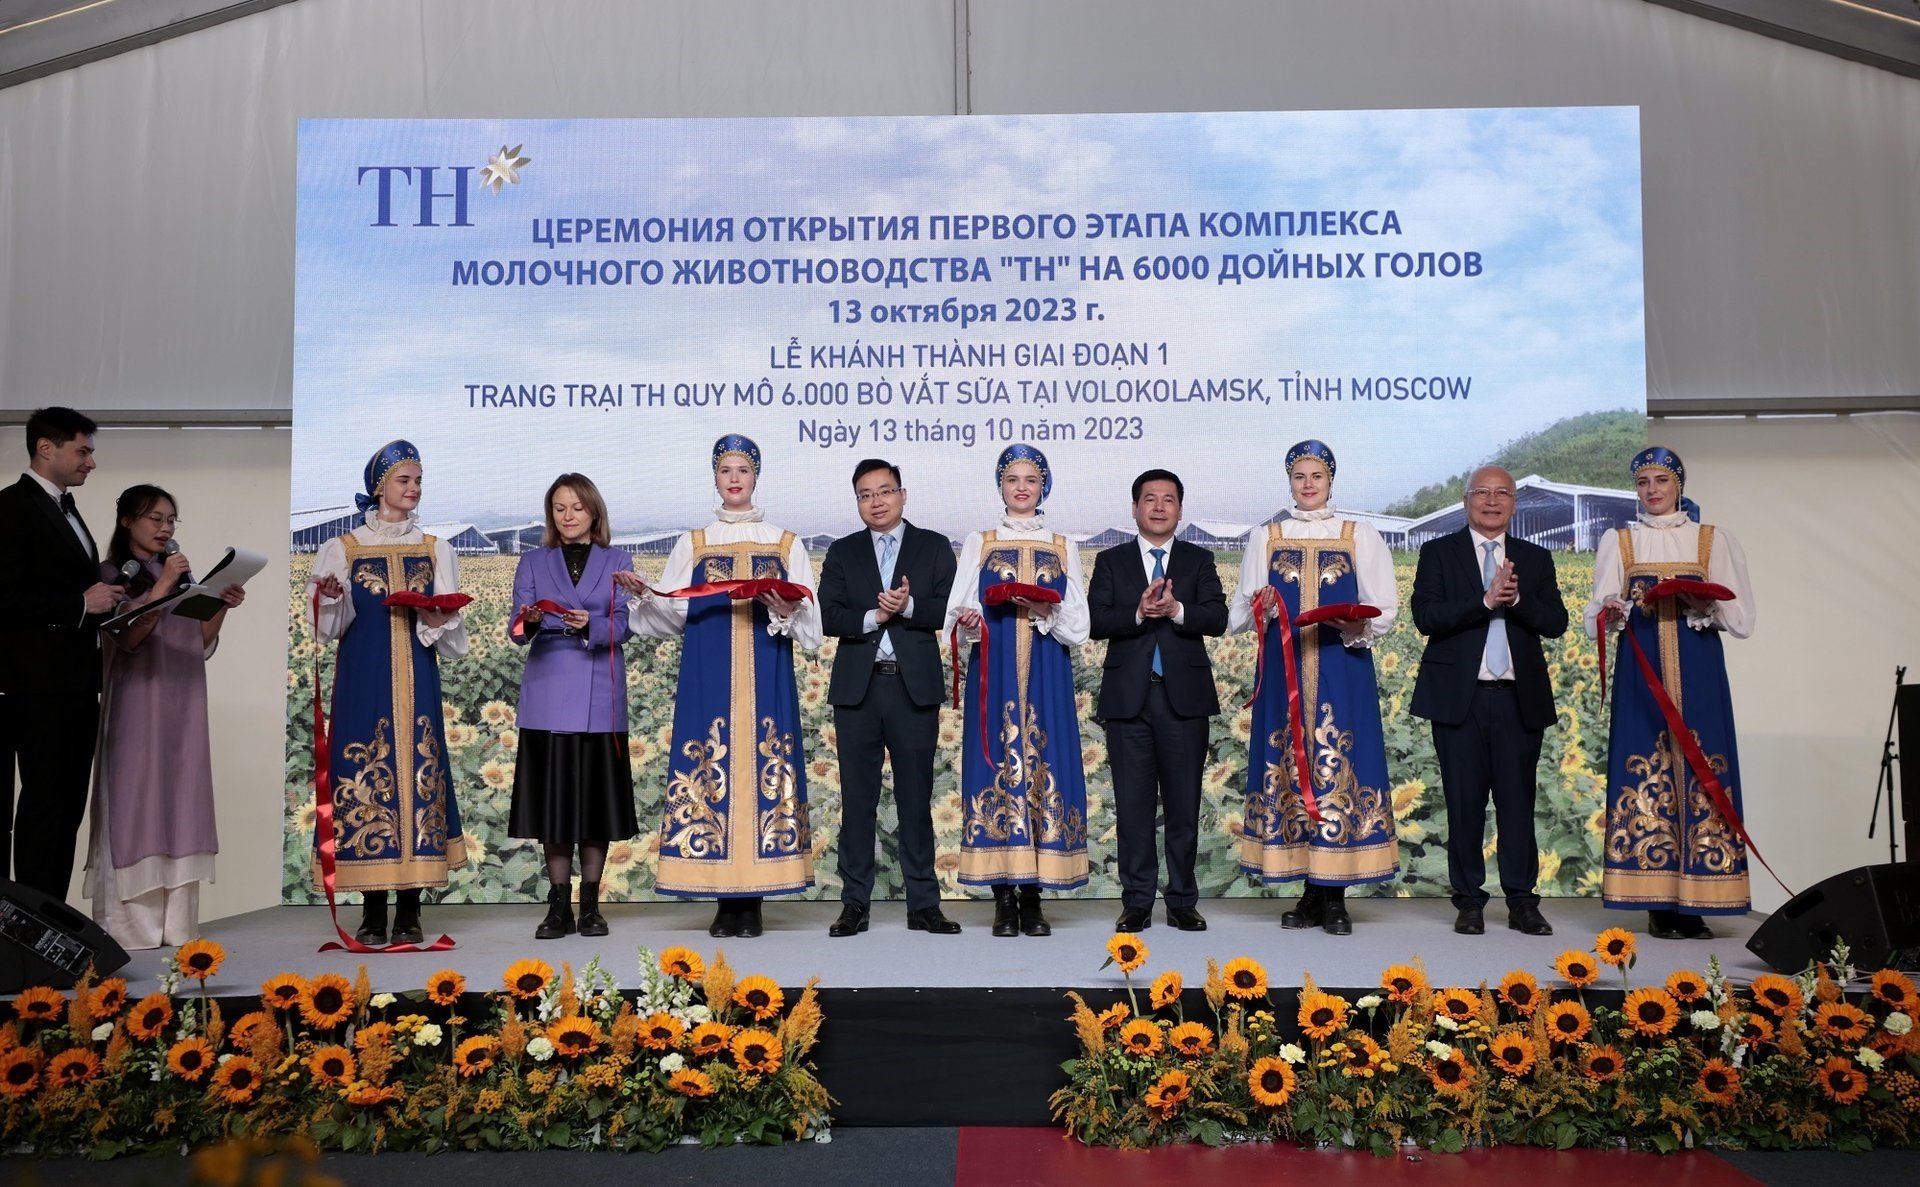 TH Group inaugurated phase 1 of the farm with a scale of 6,000 dairy cows in Volokolamsk, Moscow province.